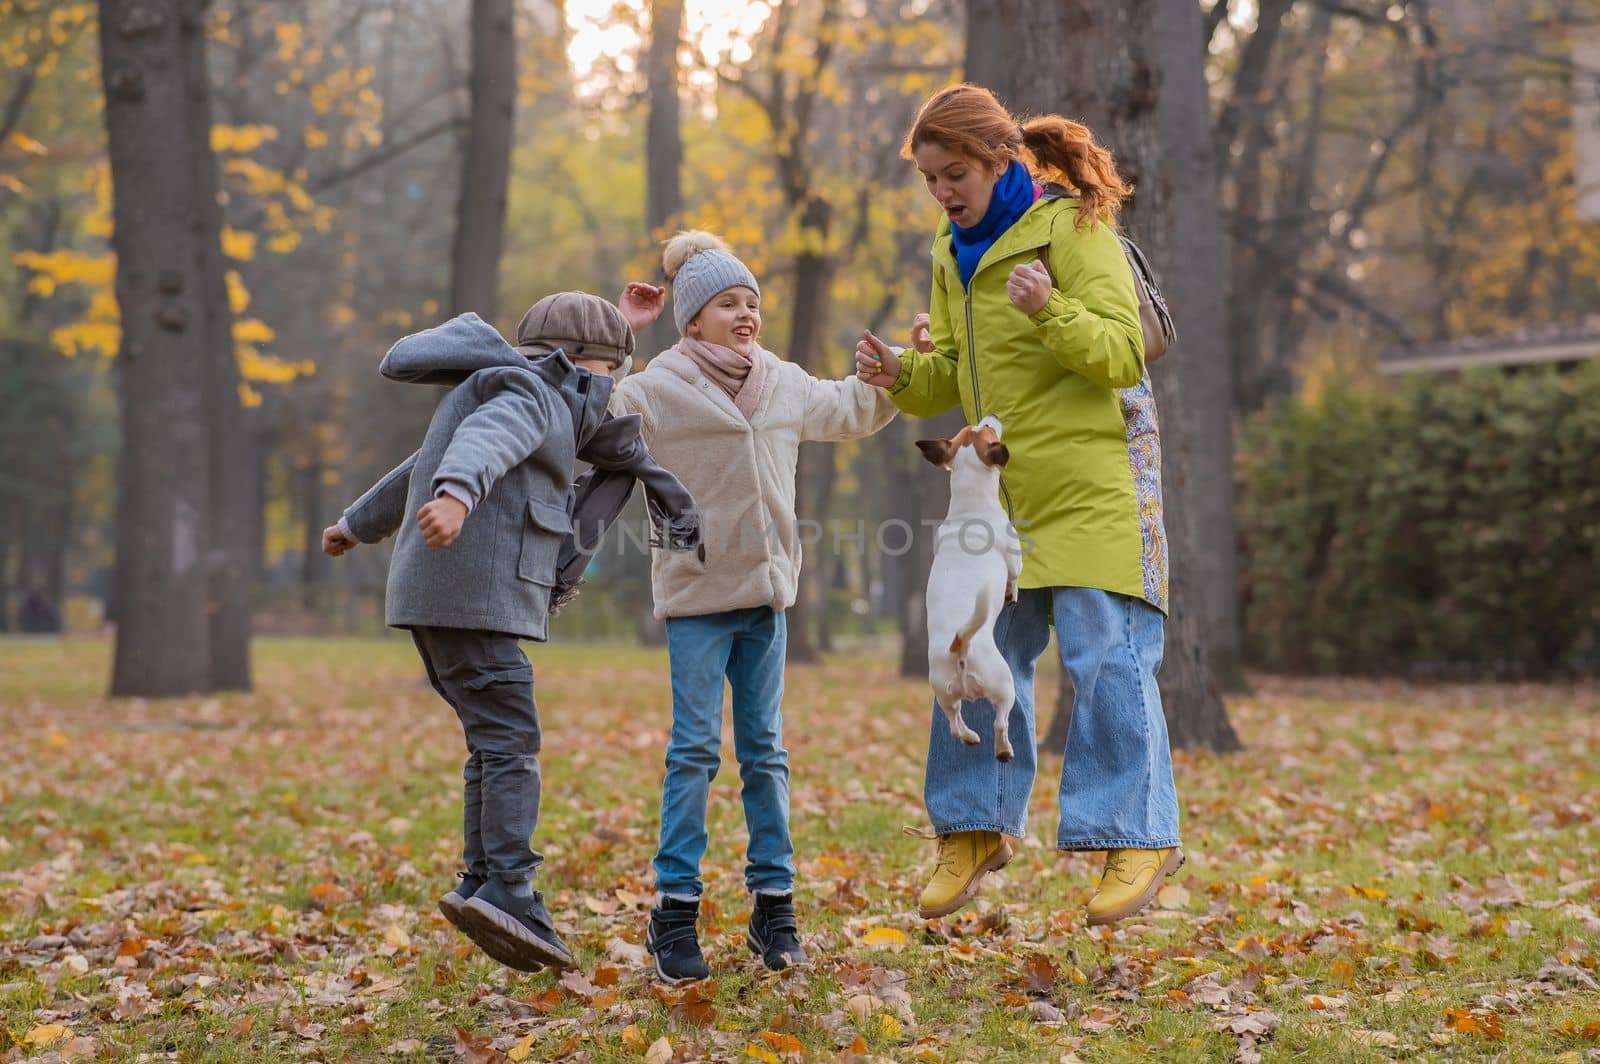 Caucasian children and red-haired woman play with dog jack russell terrier in autumn park. by mrwed54